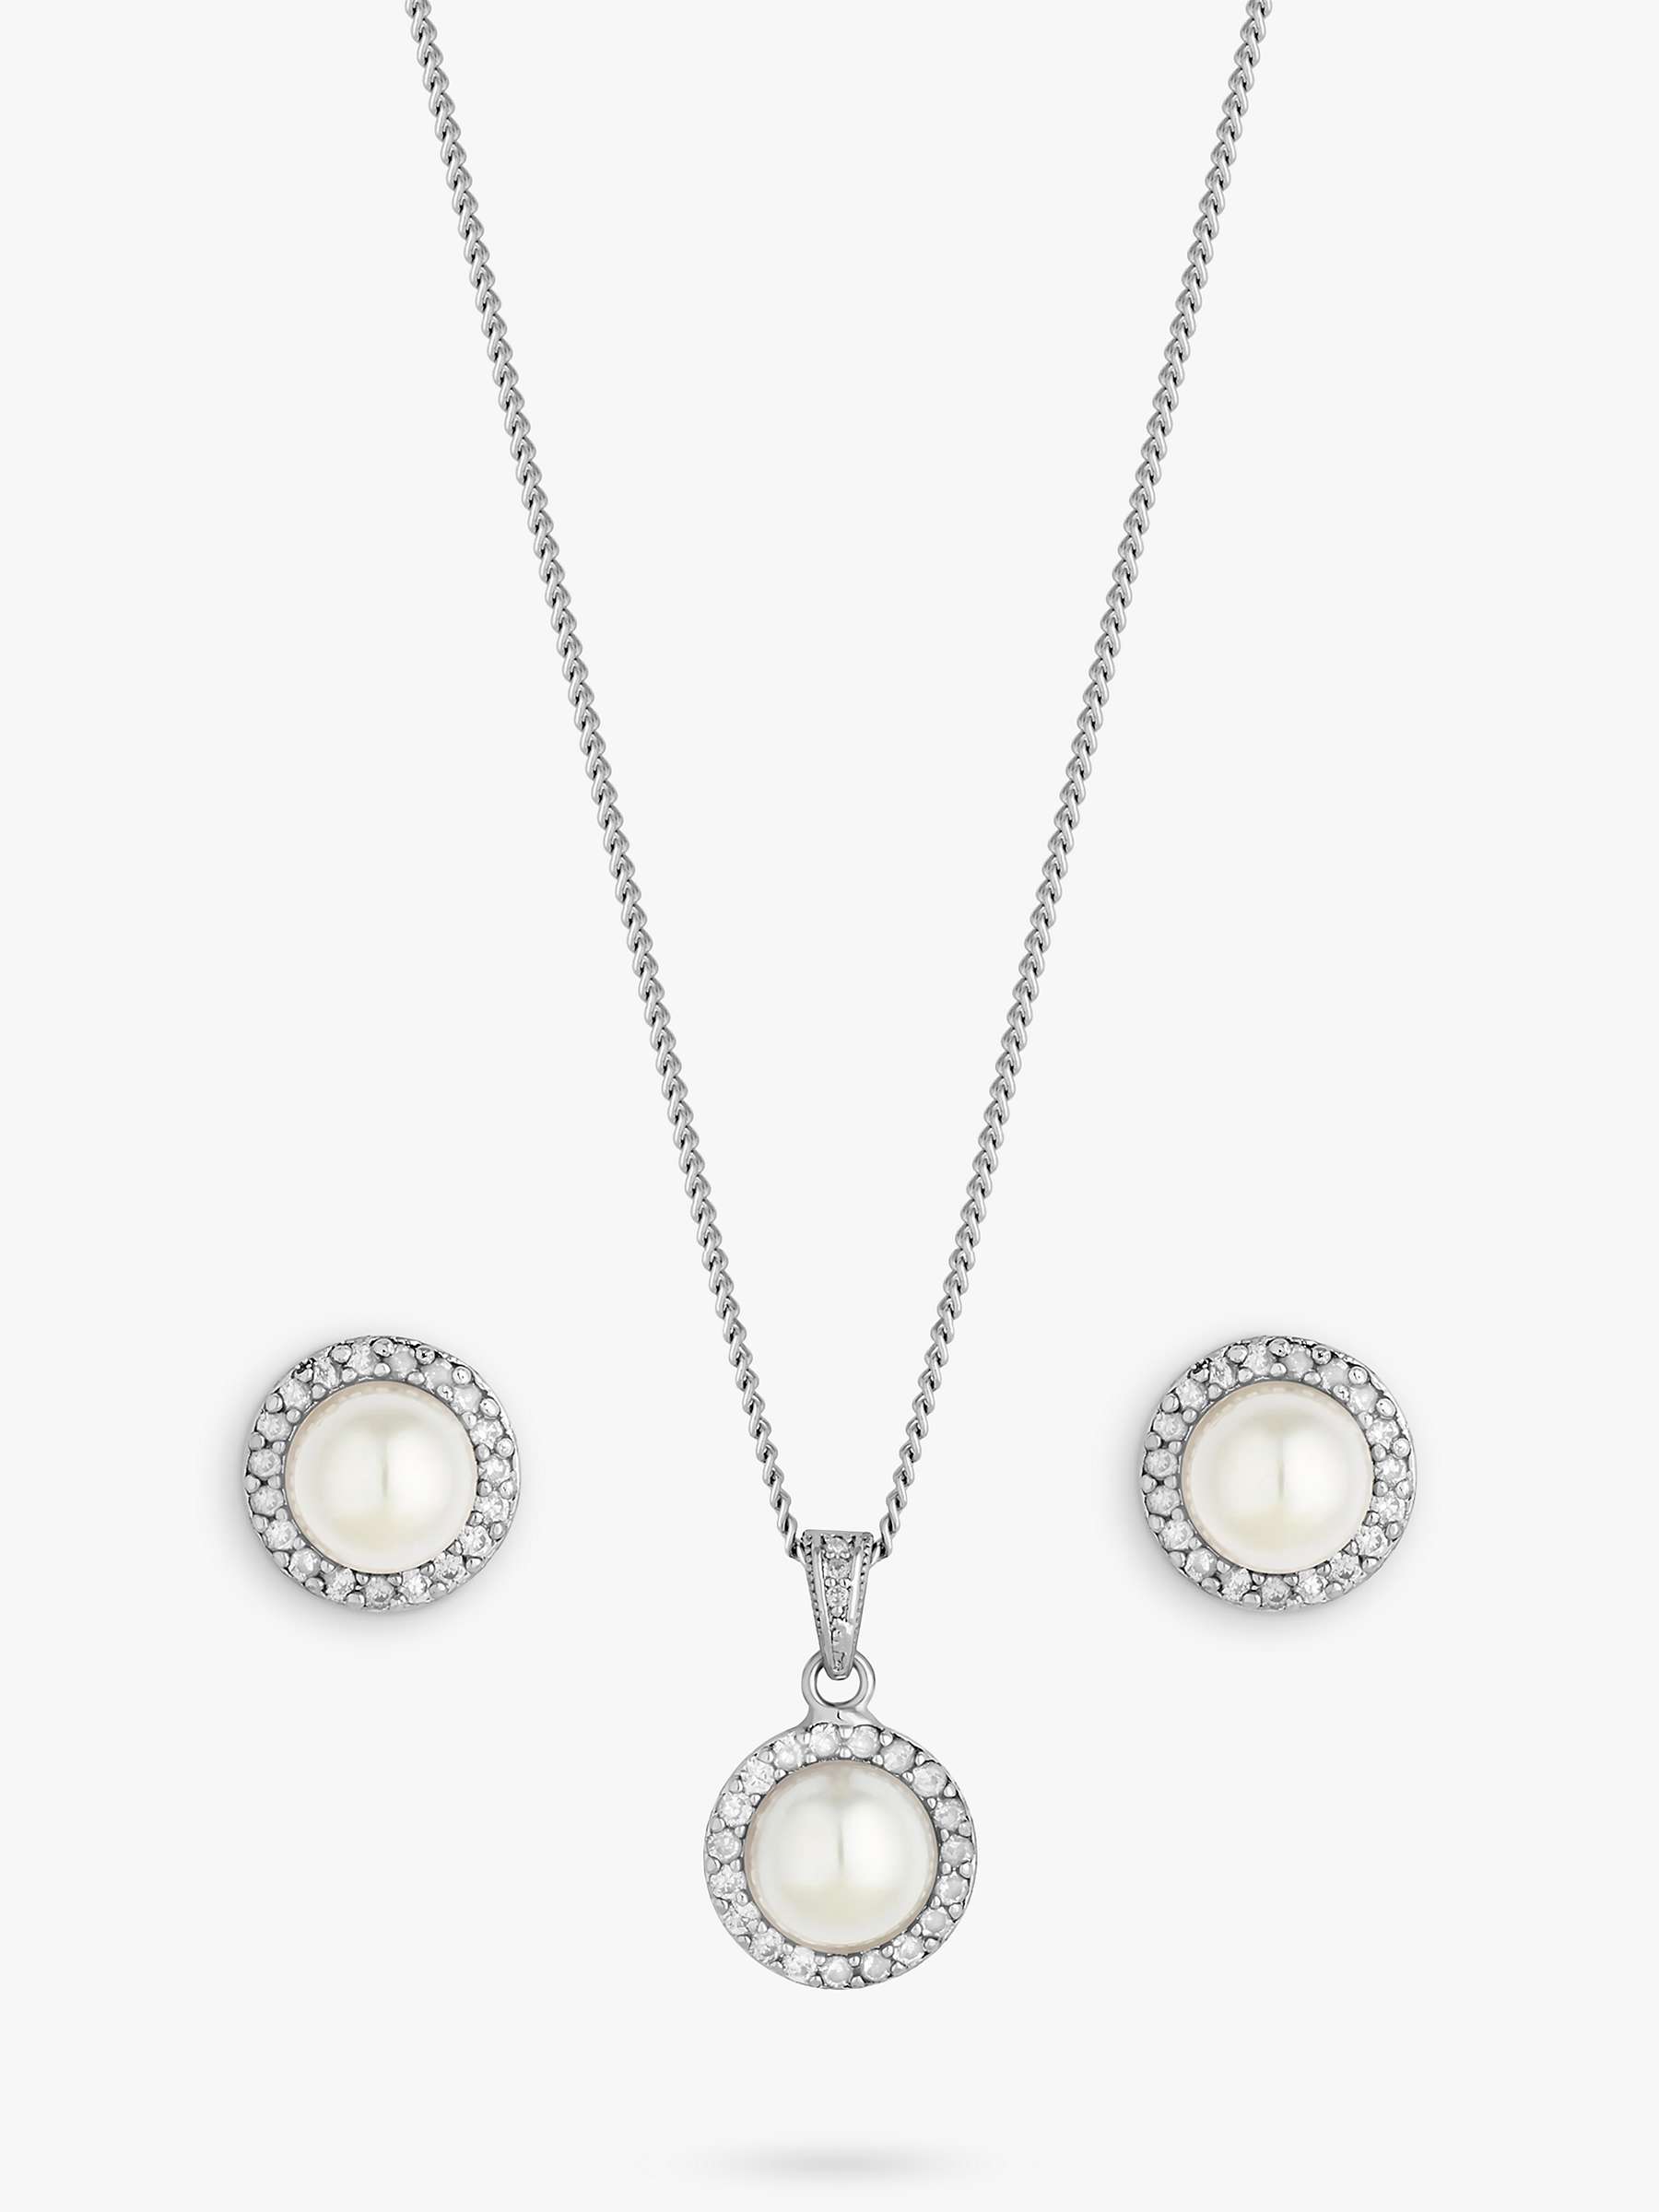 Buy Jon Richard Rhodium Plated Cubic Zirconia And Pearl Jewellery Set, Silver Online at johnlewis.com